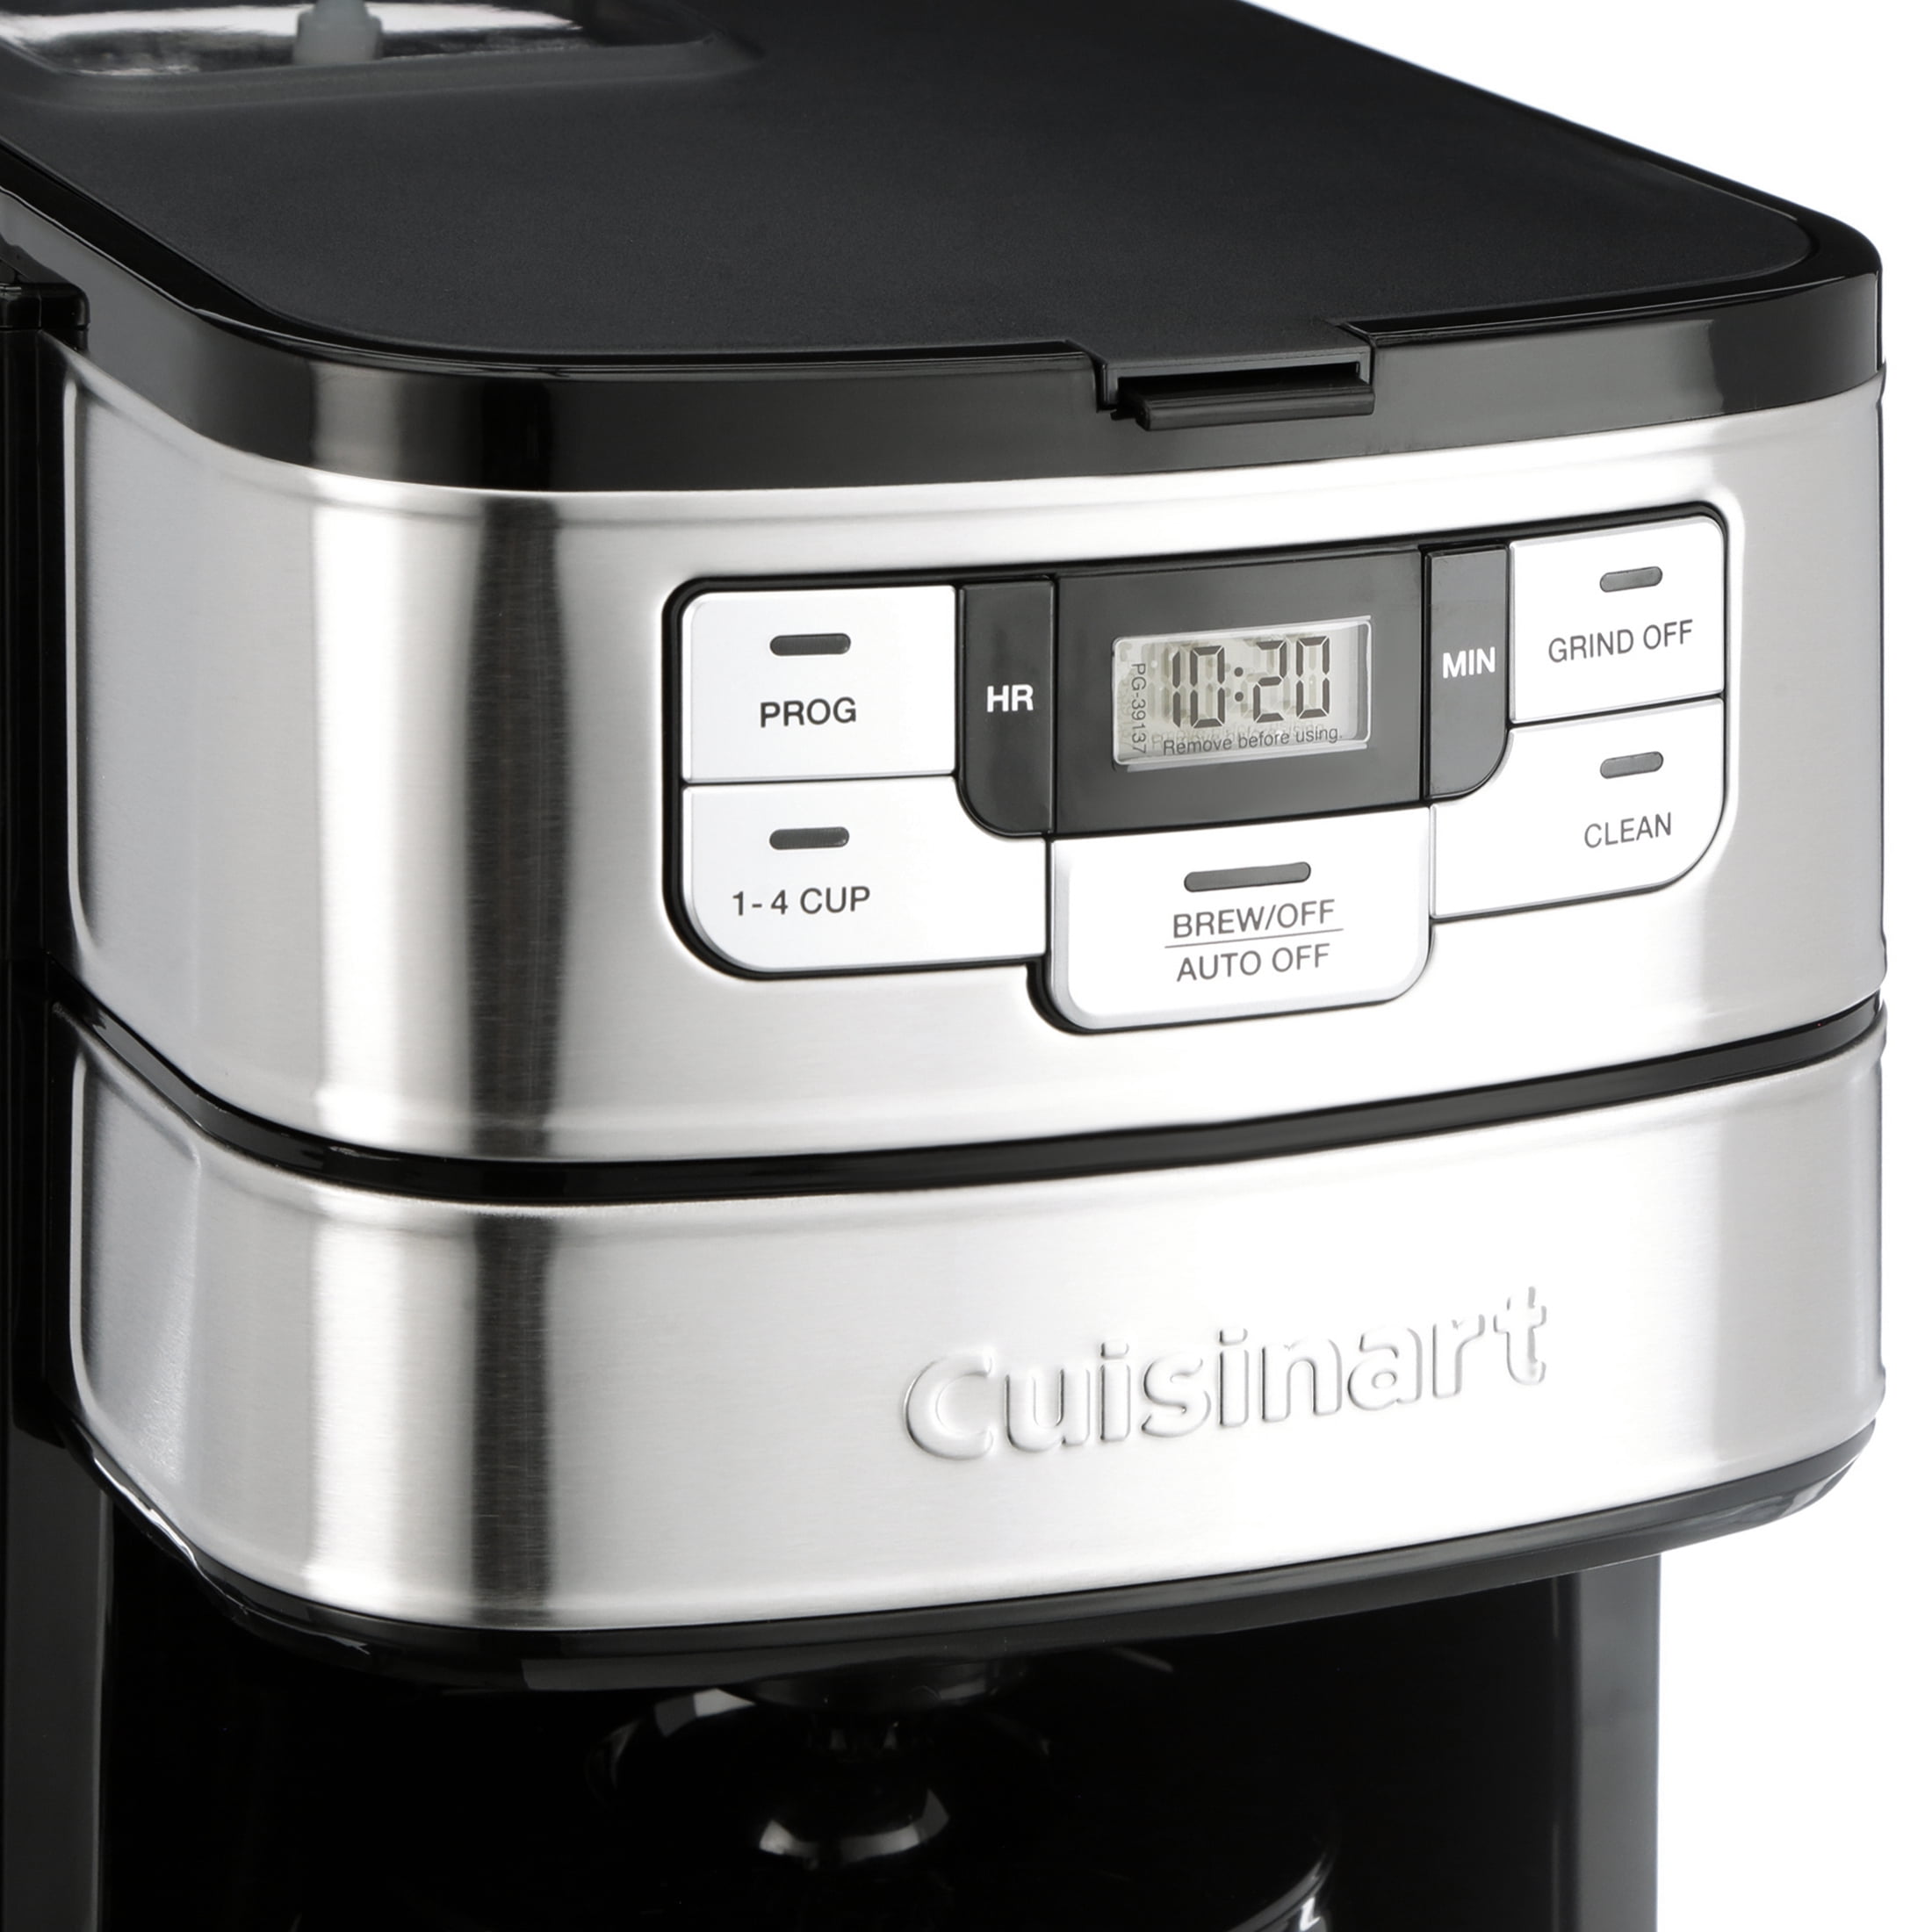 Cuisinart Grind & Brew™ 12 Cup Automatic Coffeemaker, Silver 